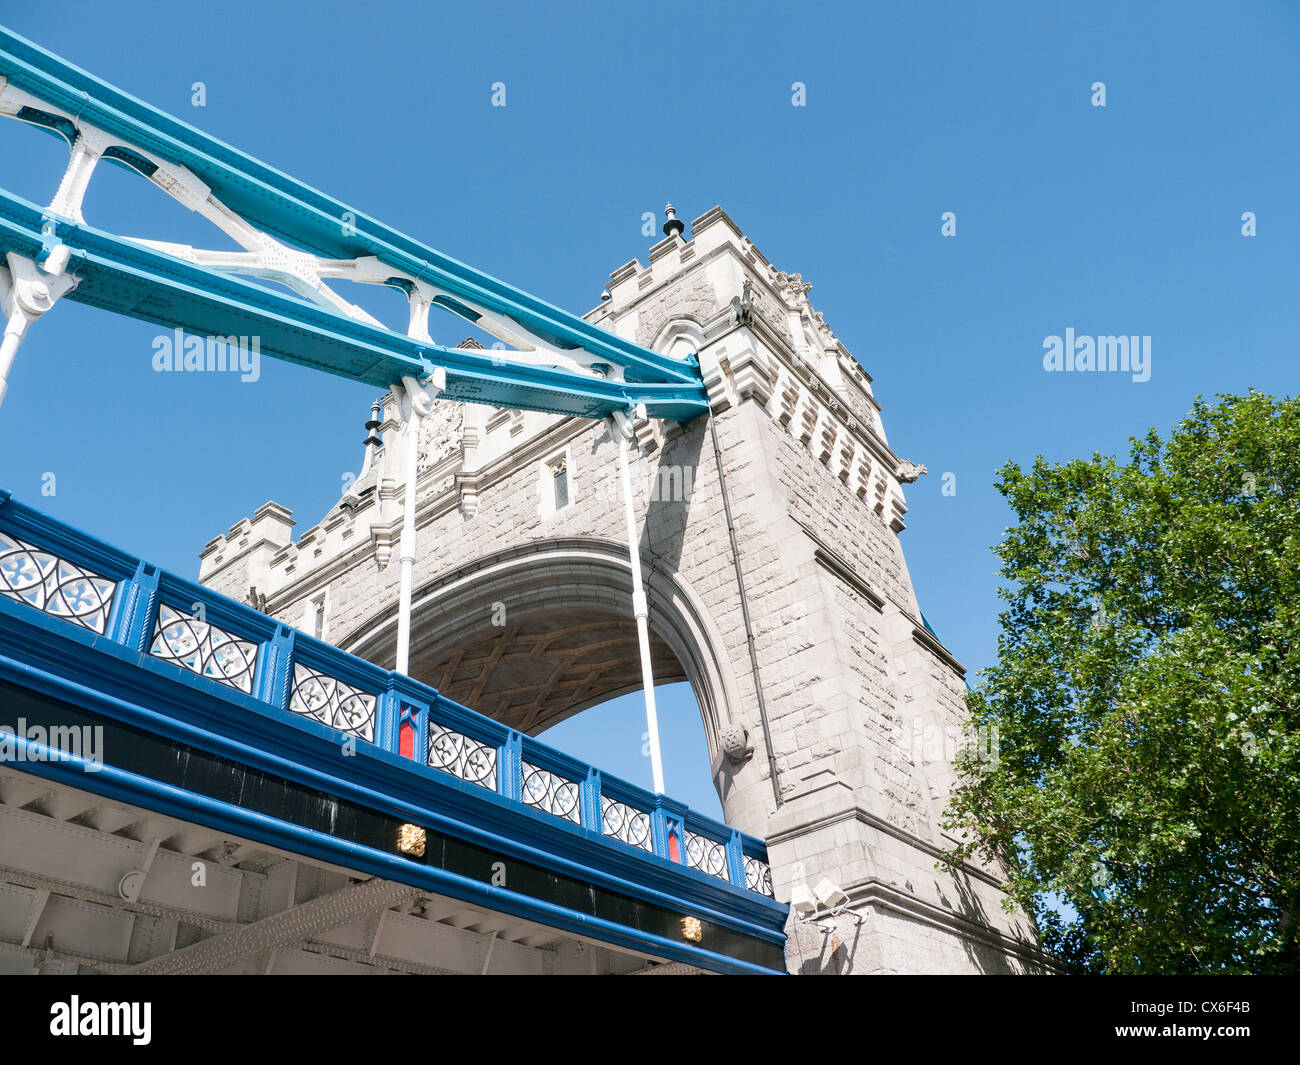 View of the North Tower of Tower Bridge, from St Katherine Docks, London, UK Stock Photo